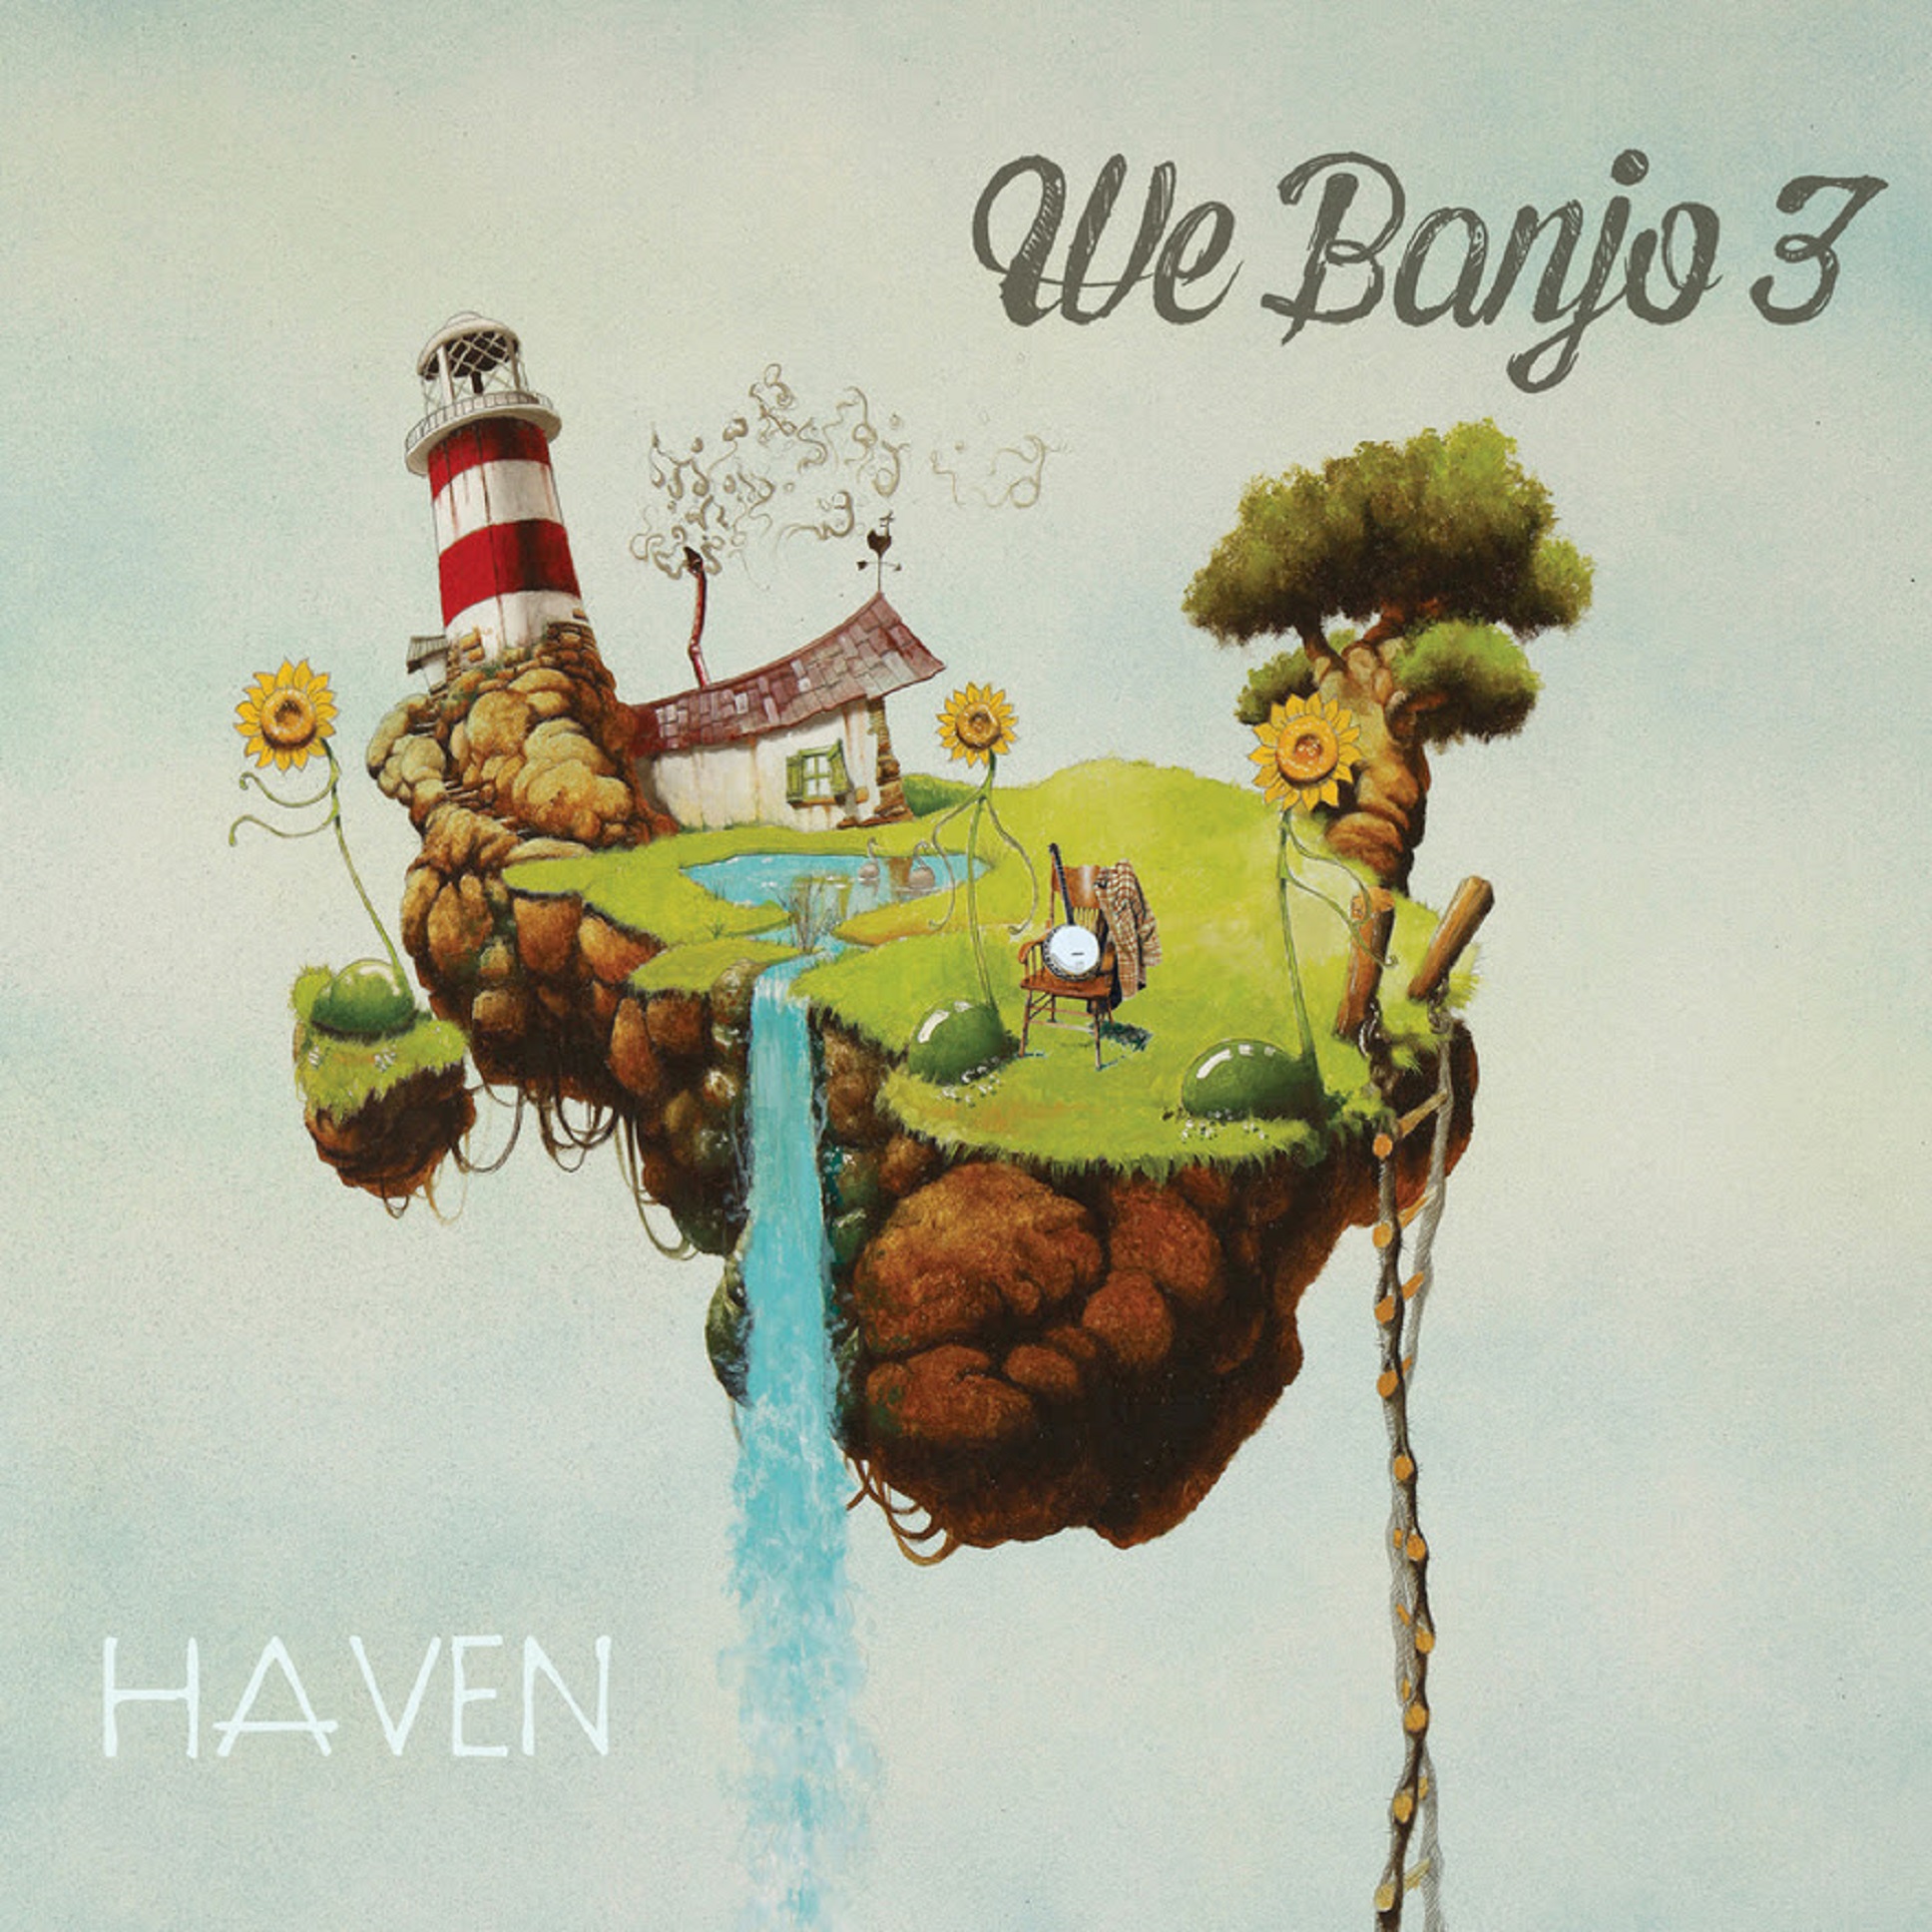 WE BANJO 3 announces release of HAVEN on 7/27